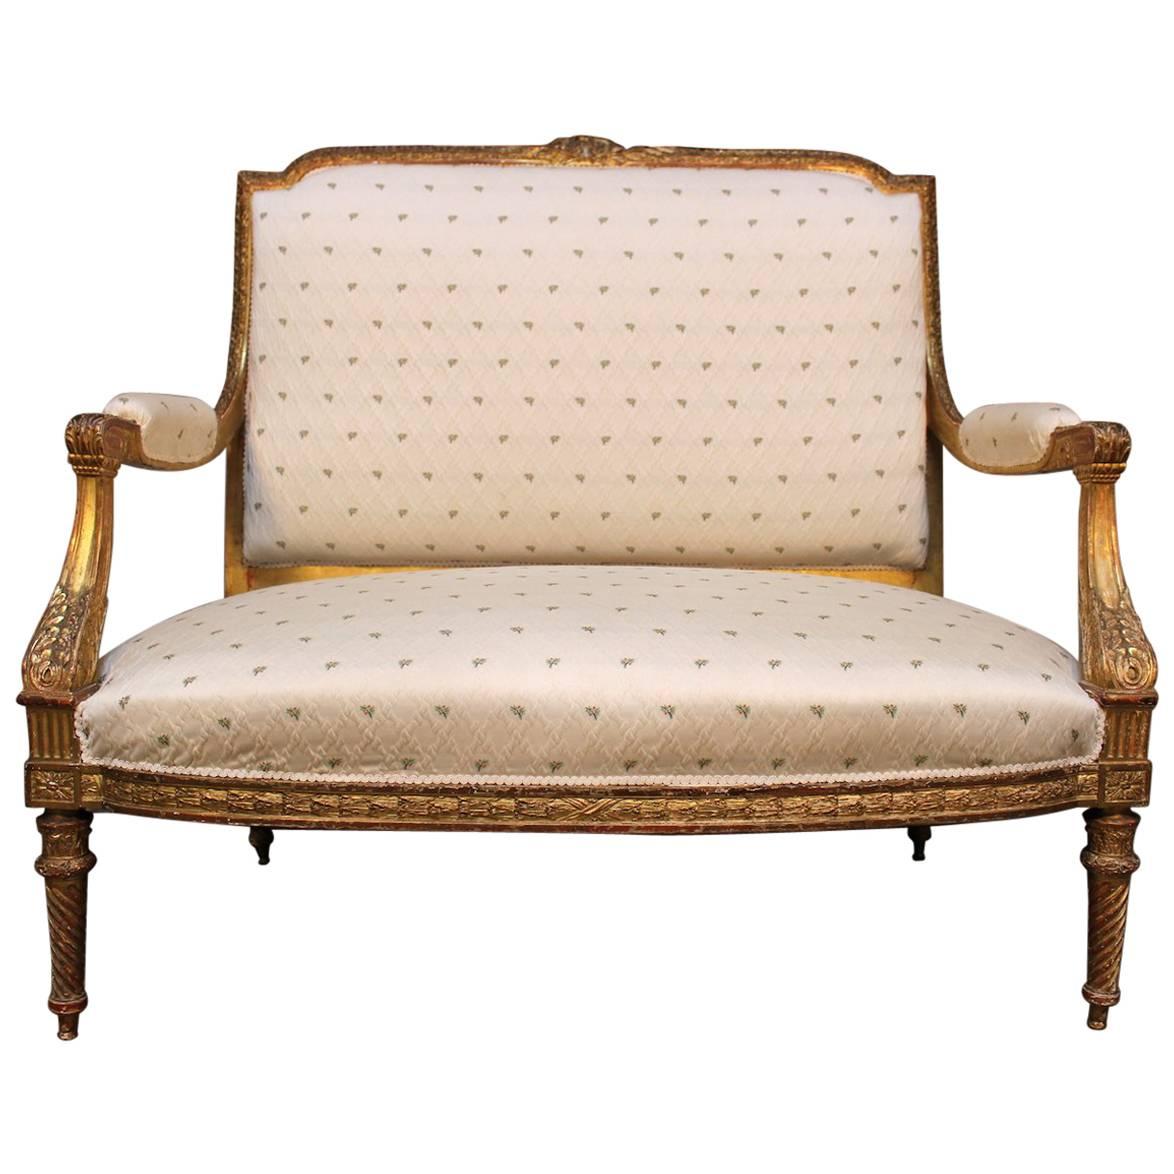 French Louis XVI Style Gilt Wood Canape, Settee